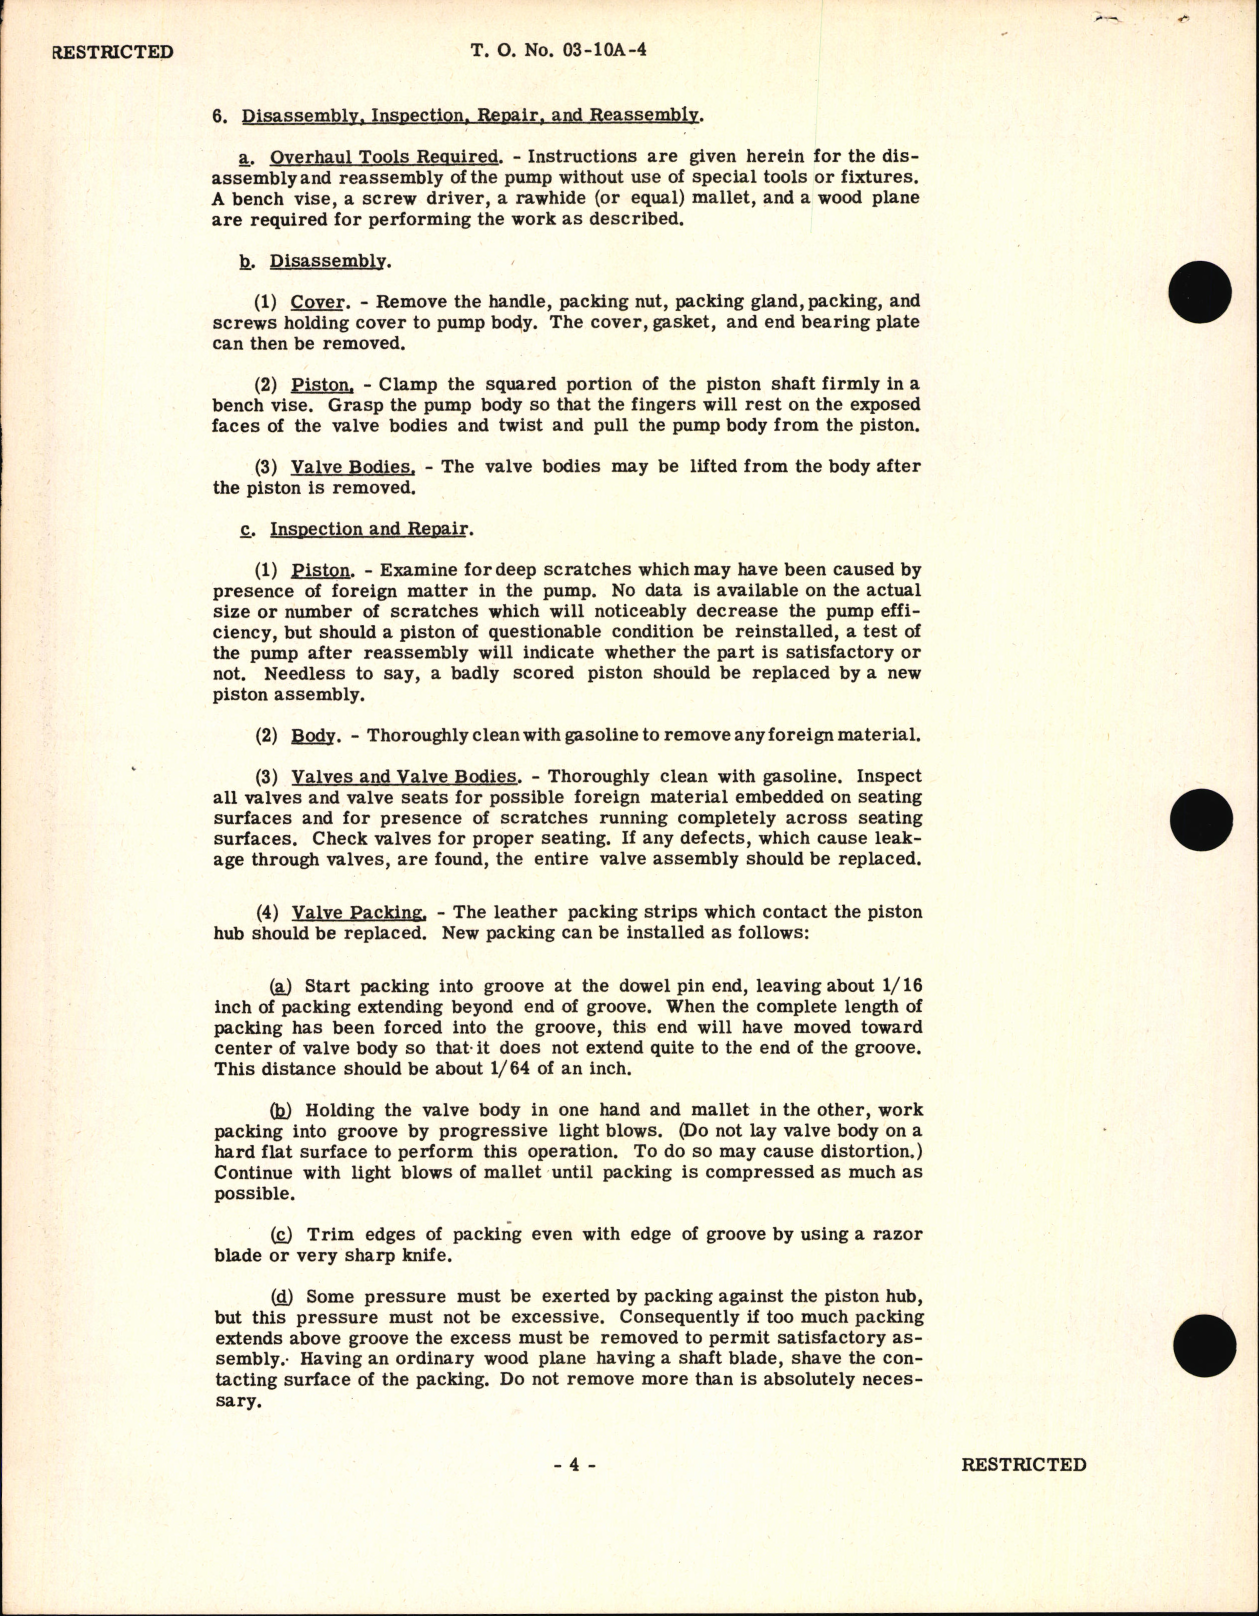 Sample page 8 from AirCorps Library document: Handbook of Instructions with Parts Catalog for Type D-3 Hand Refueling Pump